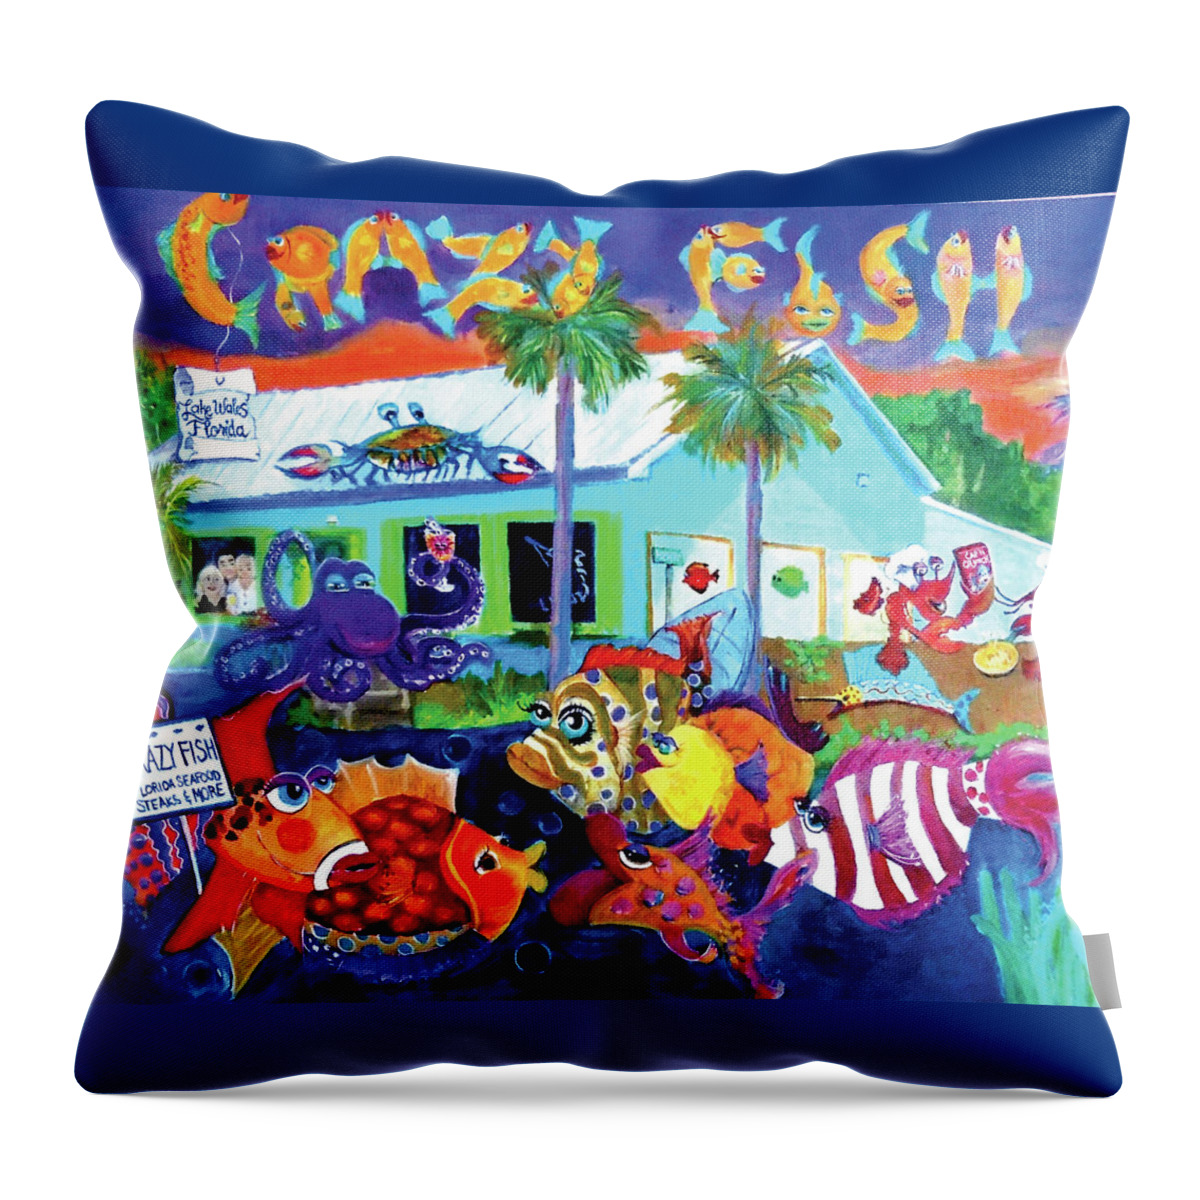 Crazy Fish Restaurant Throw Pillow featuring the painting Happy Times at the Crazy Fish by Linda Kegley